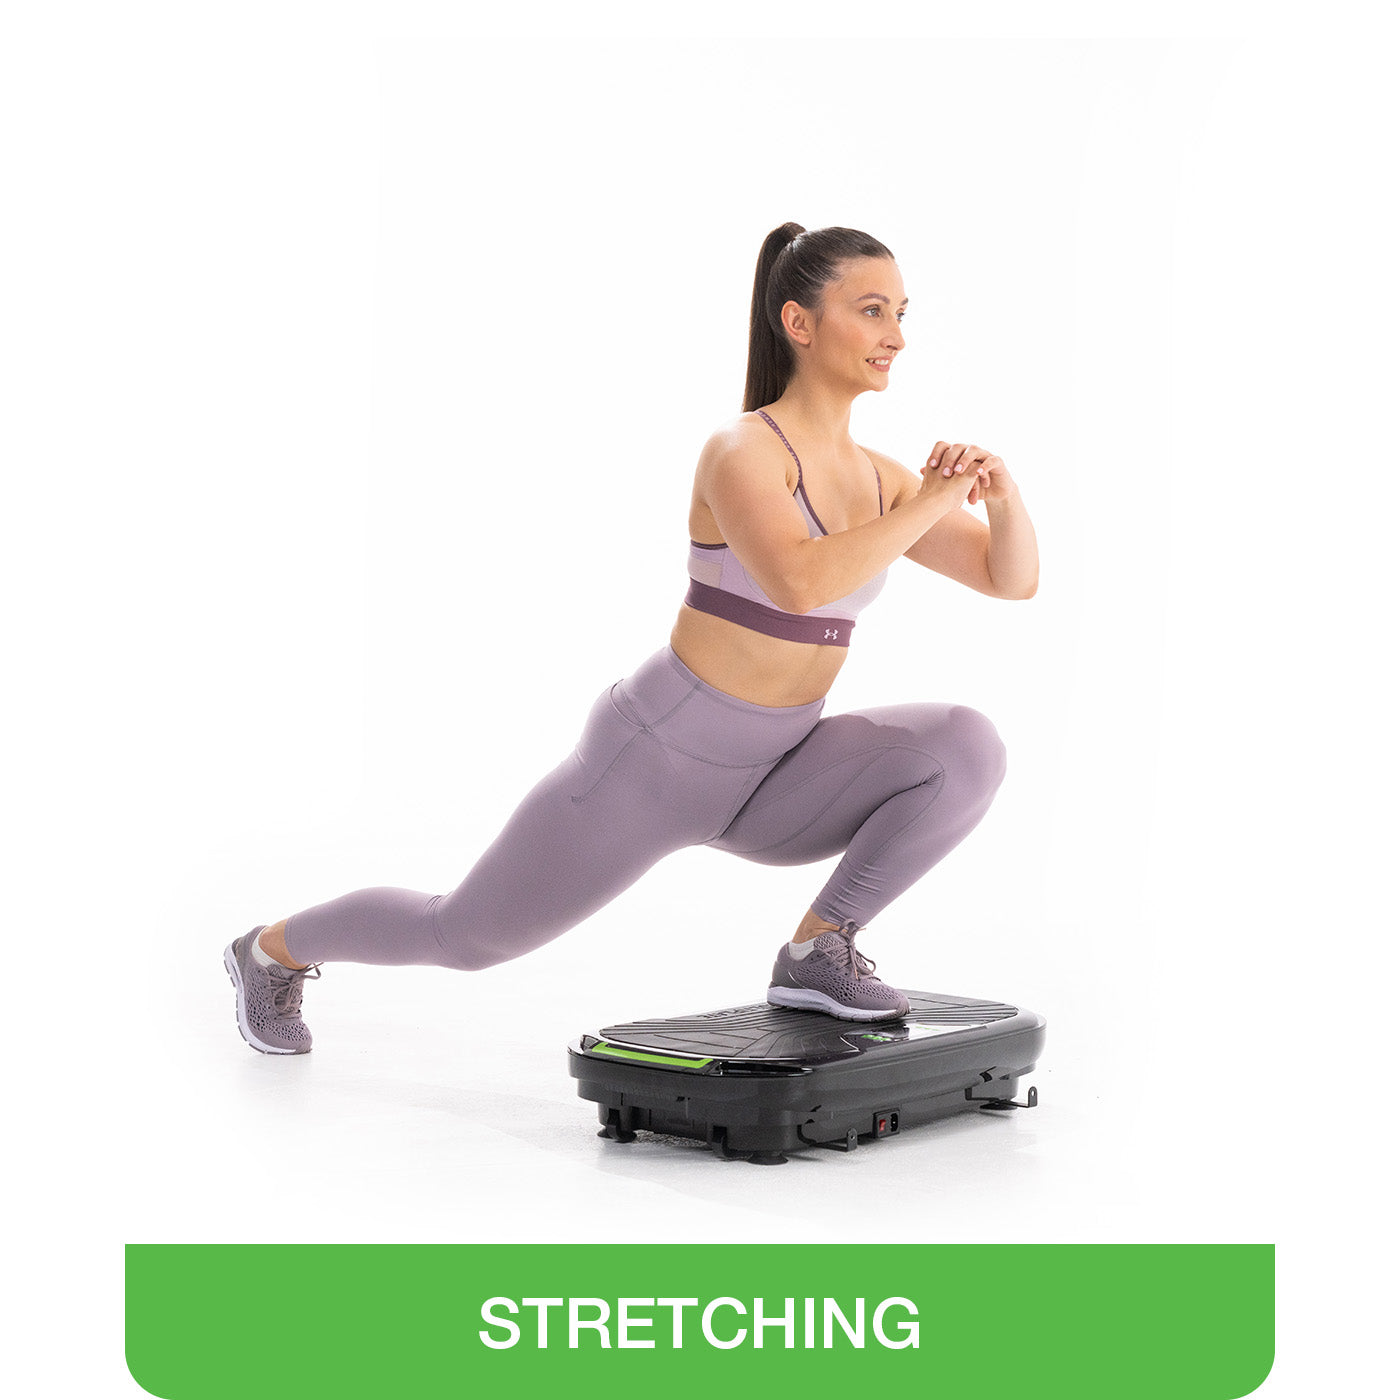 woman stretching on vibration plate